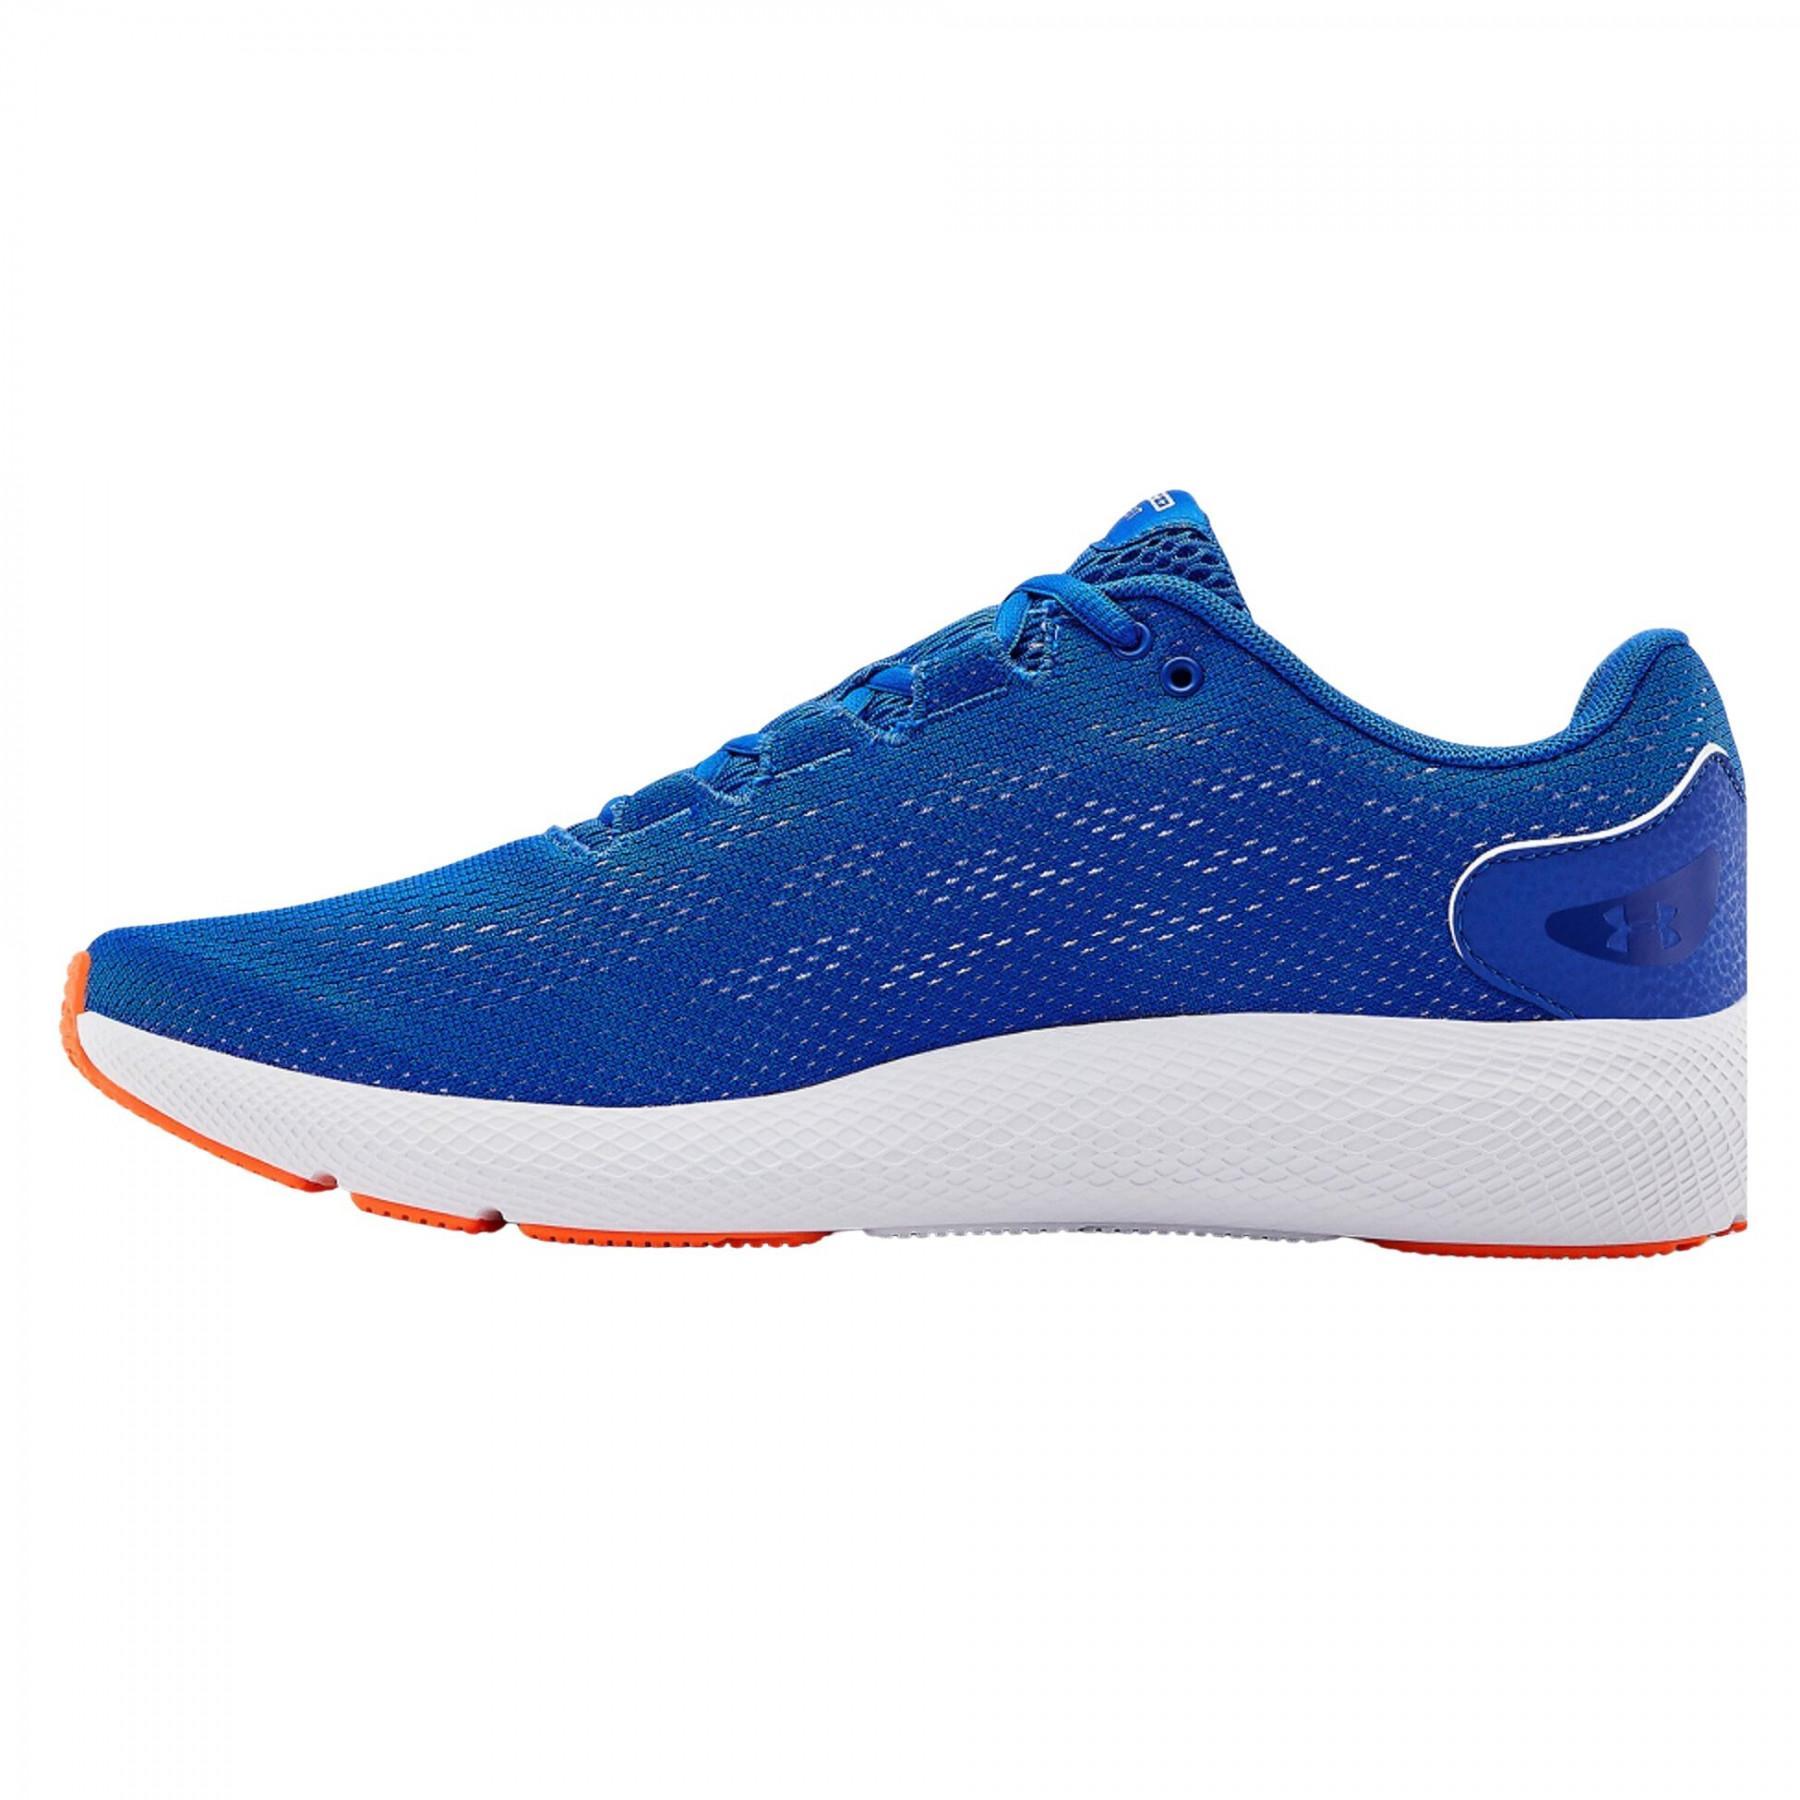 Chaussures de running Under Armour Charged Pursuit 2